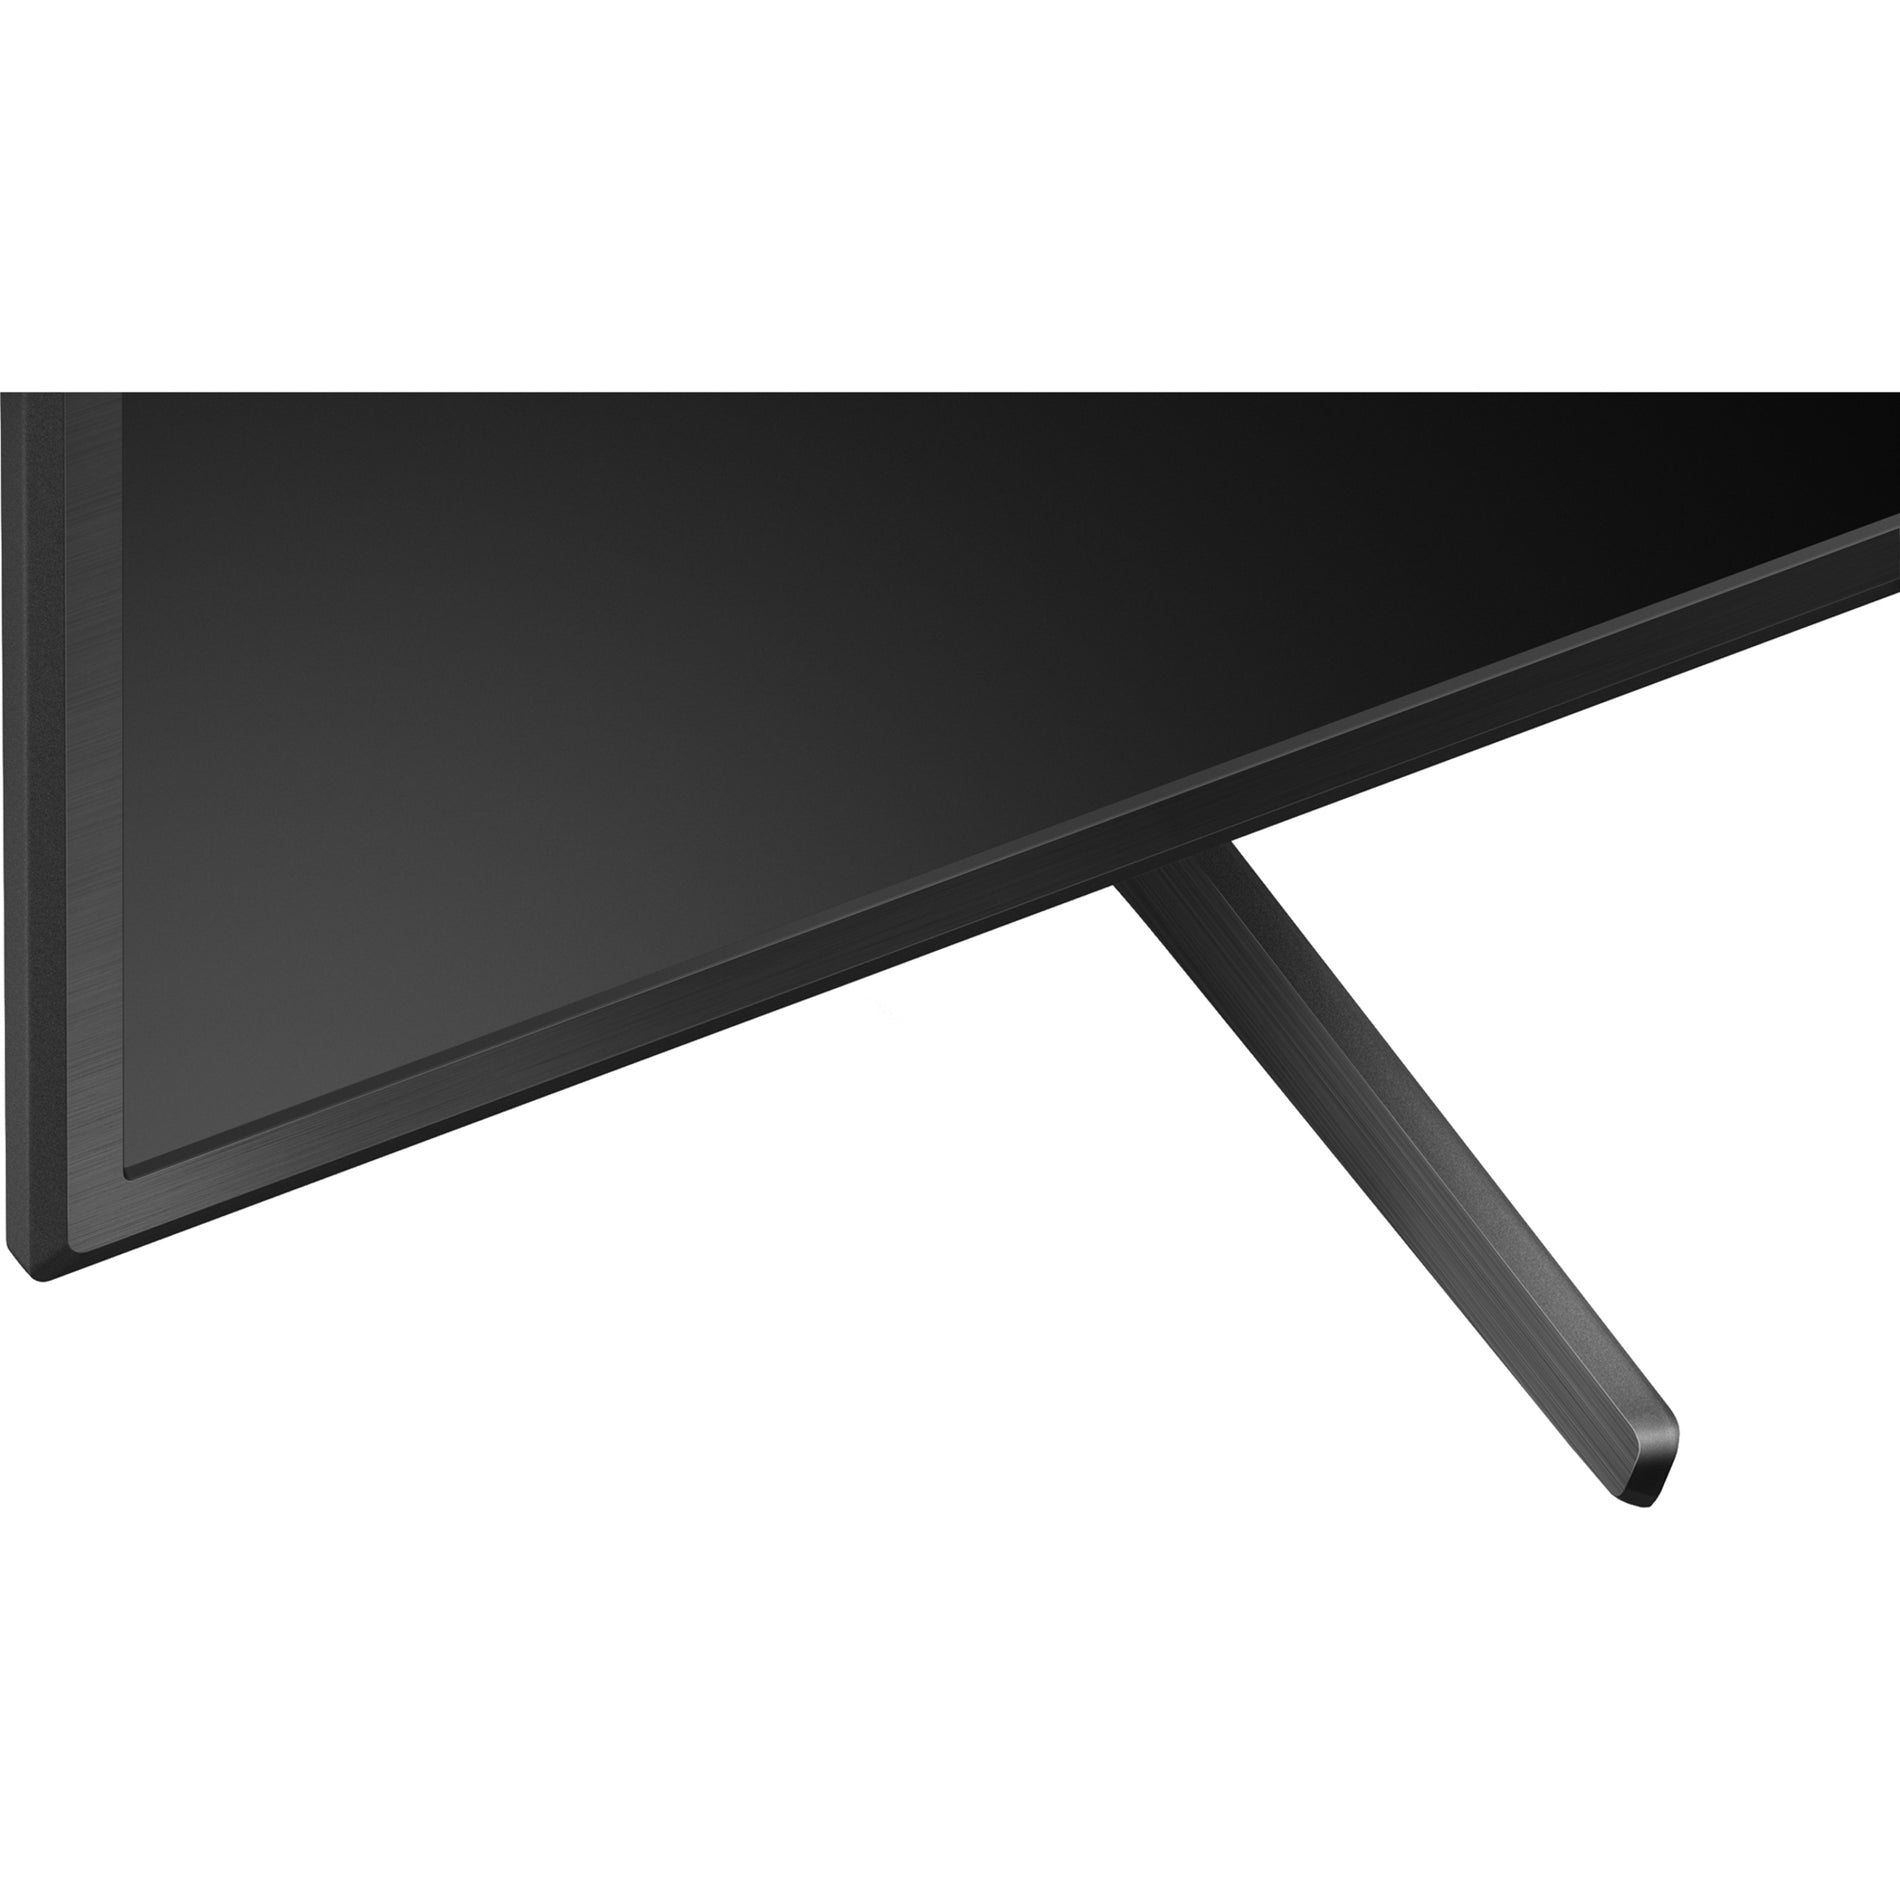 Sony Pro FW75BZ30J 75-inch BRAVIA 4K Ultra HD HDR Professional Display, Android 10, 3 Year Warranty, USB, Serial, 440 Nit, 2160p, 300,000:1 Dynamic Contrast Ratio